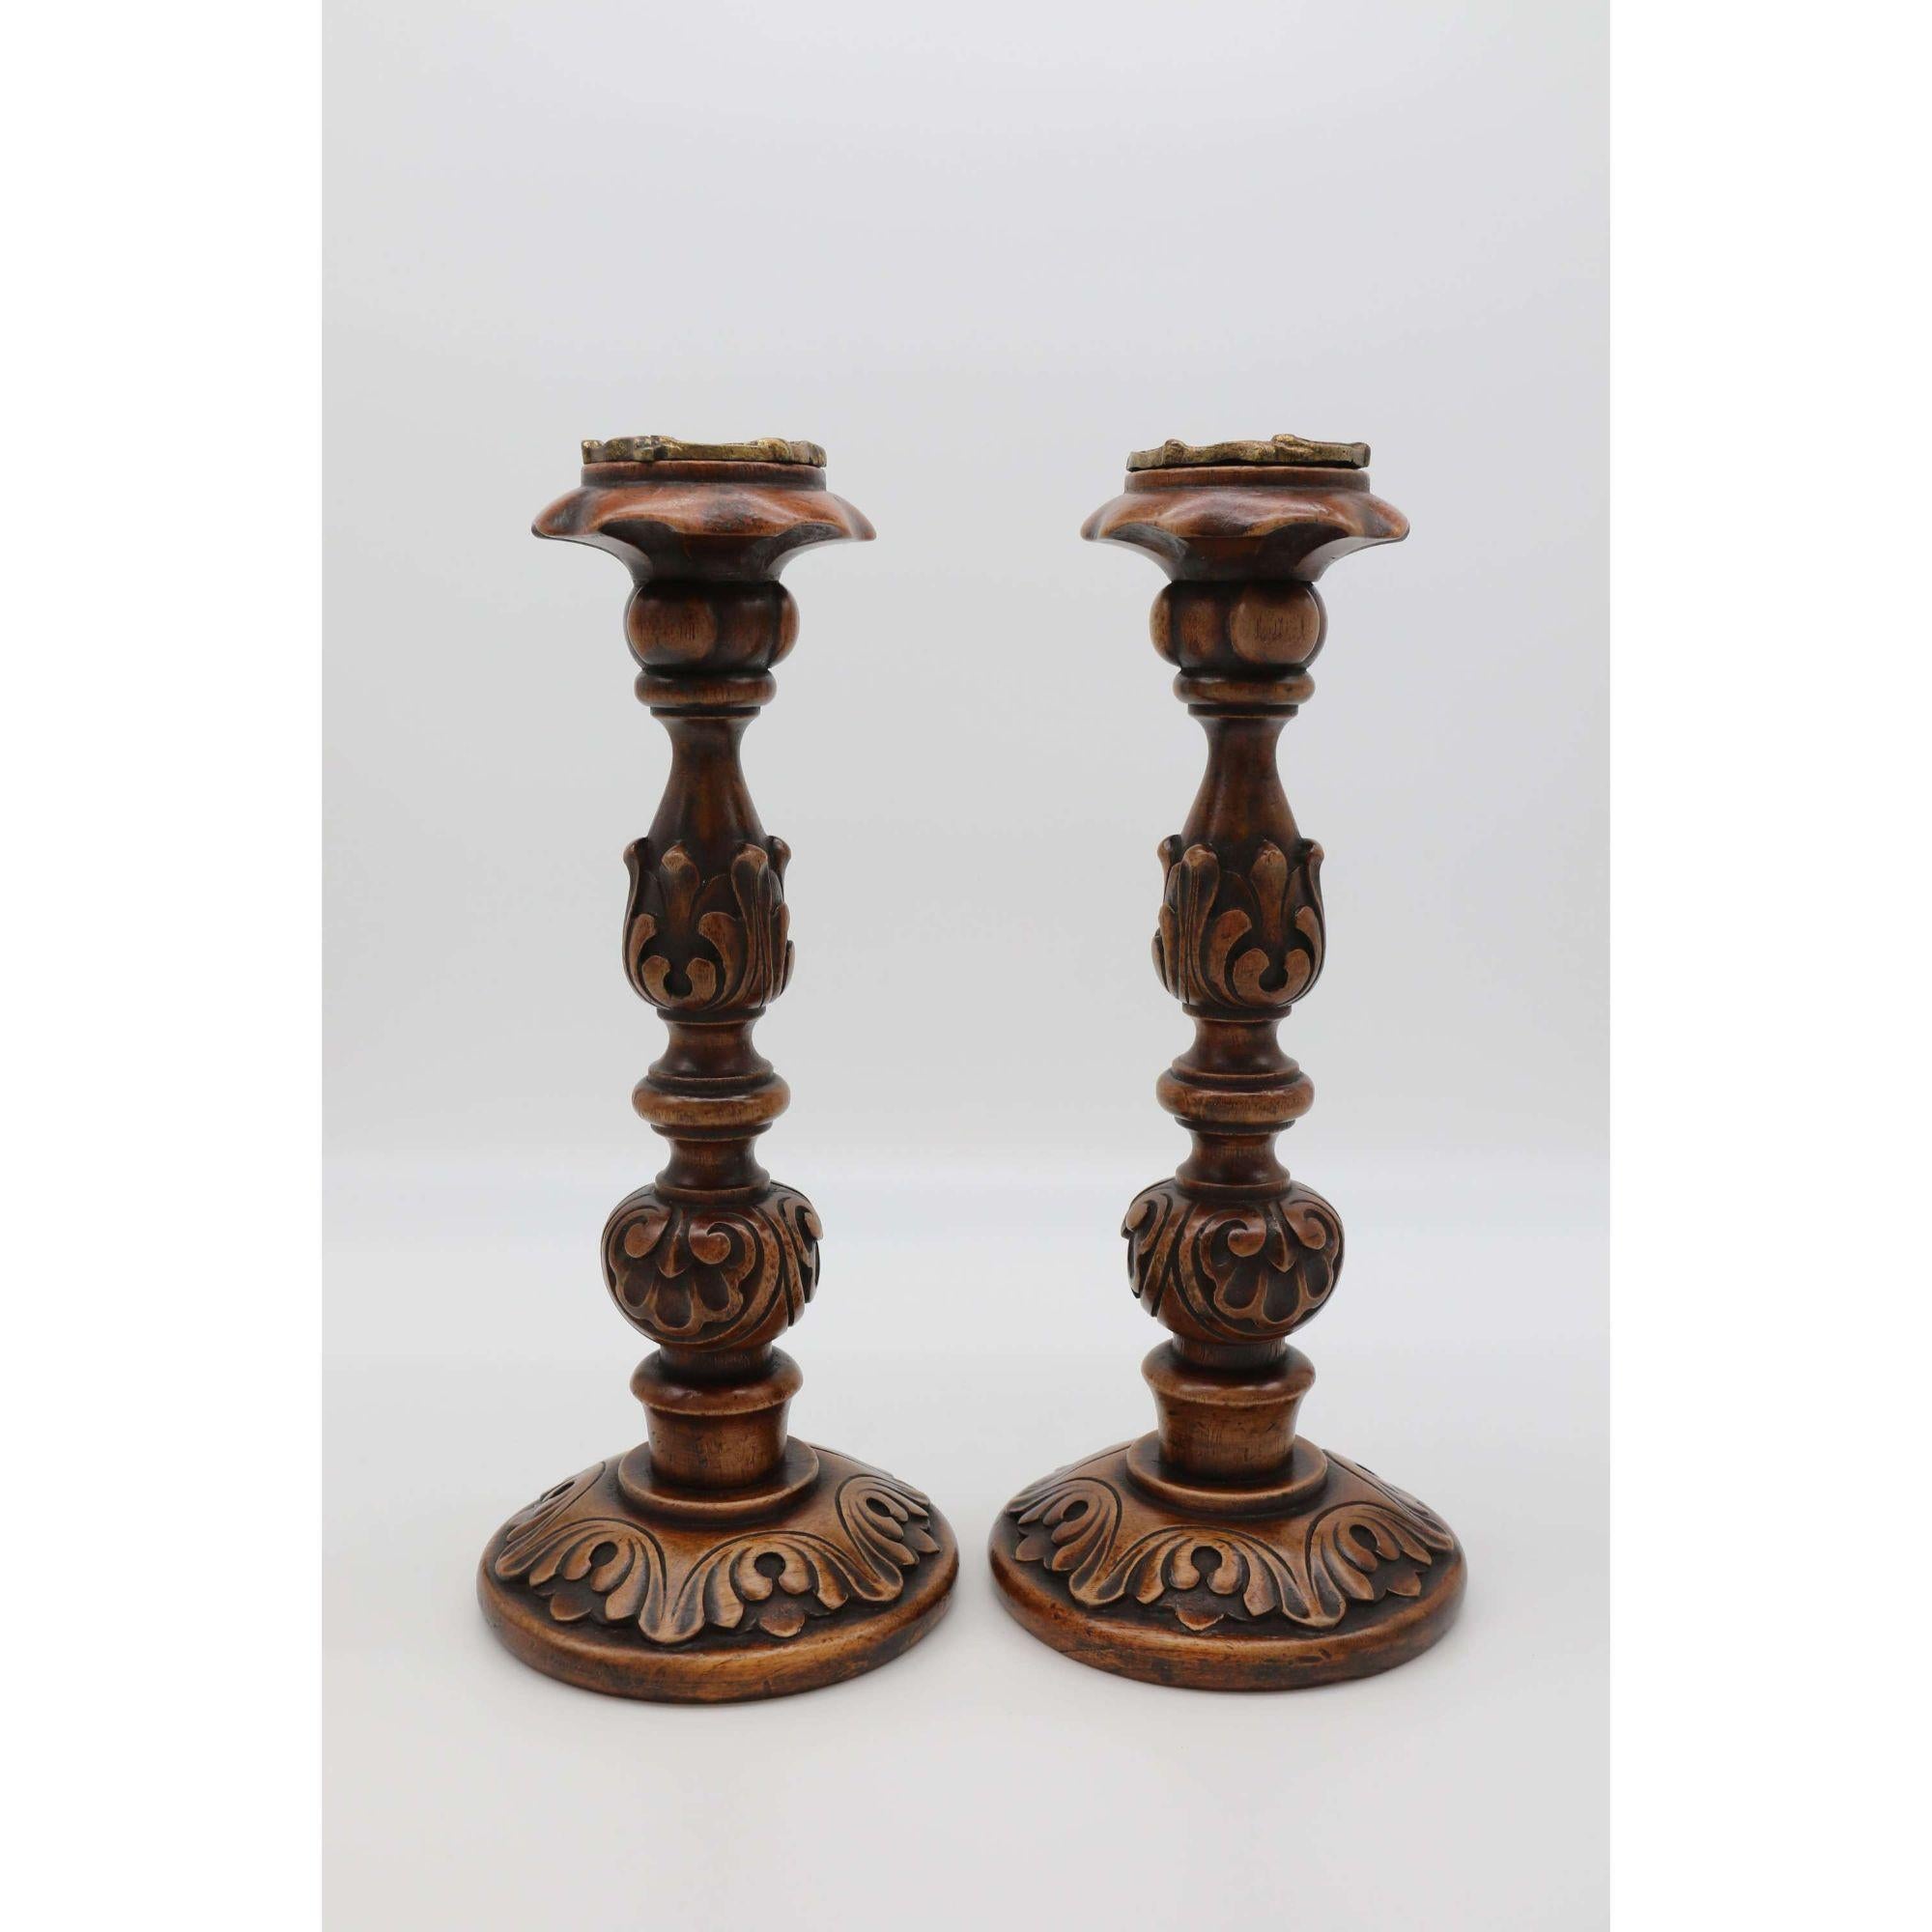 English 19th Century Carved Walnut and Brass Mounted Candlesticks, circa 1880 For Sale 3